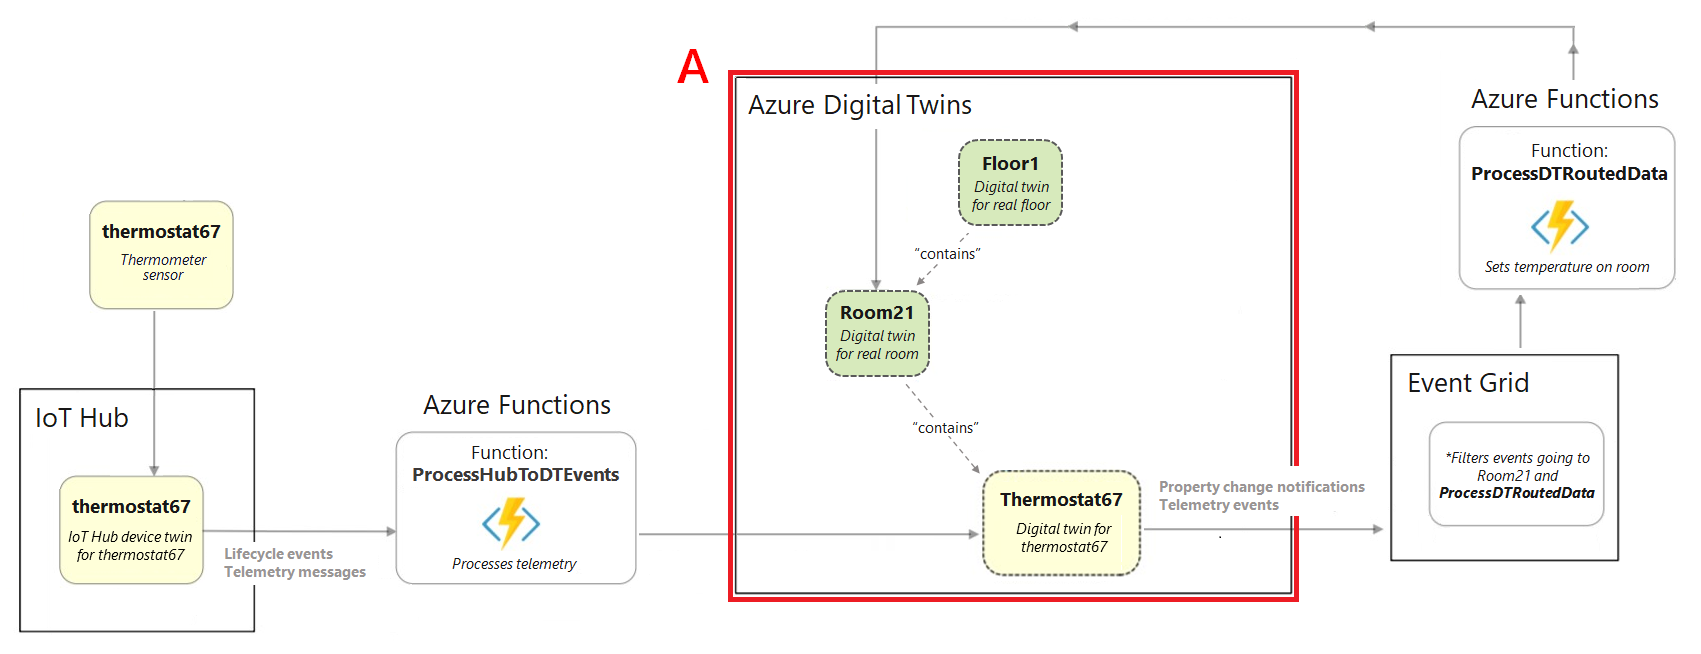 Diagram of an excerpt from the full building scenario diagram highlighting the Azure Digital Twins instance section.